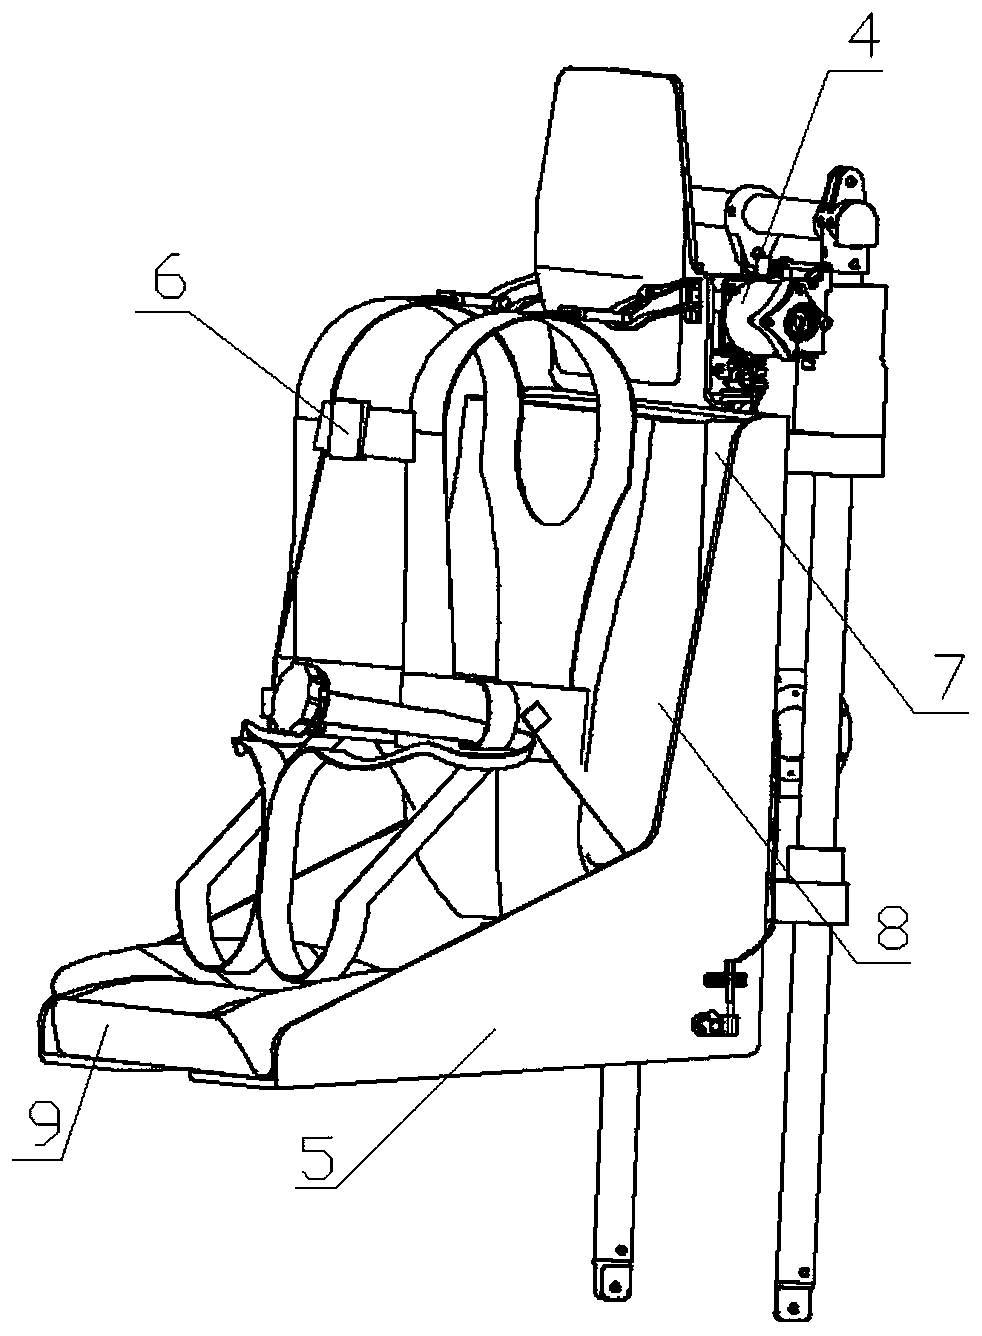 Multiple protection integrated helicopter anti-crash seat